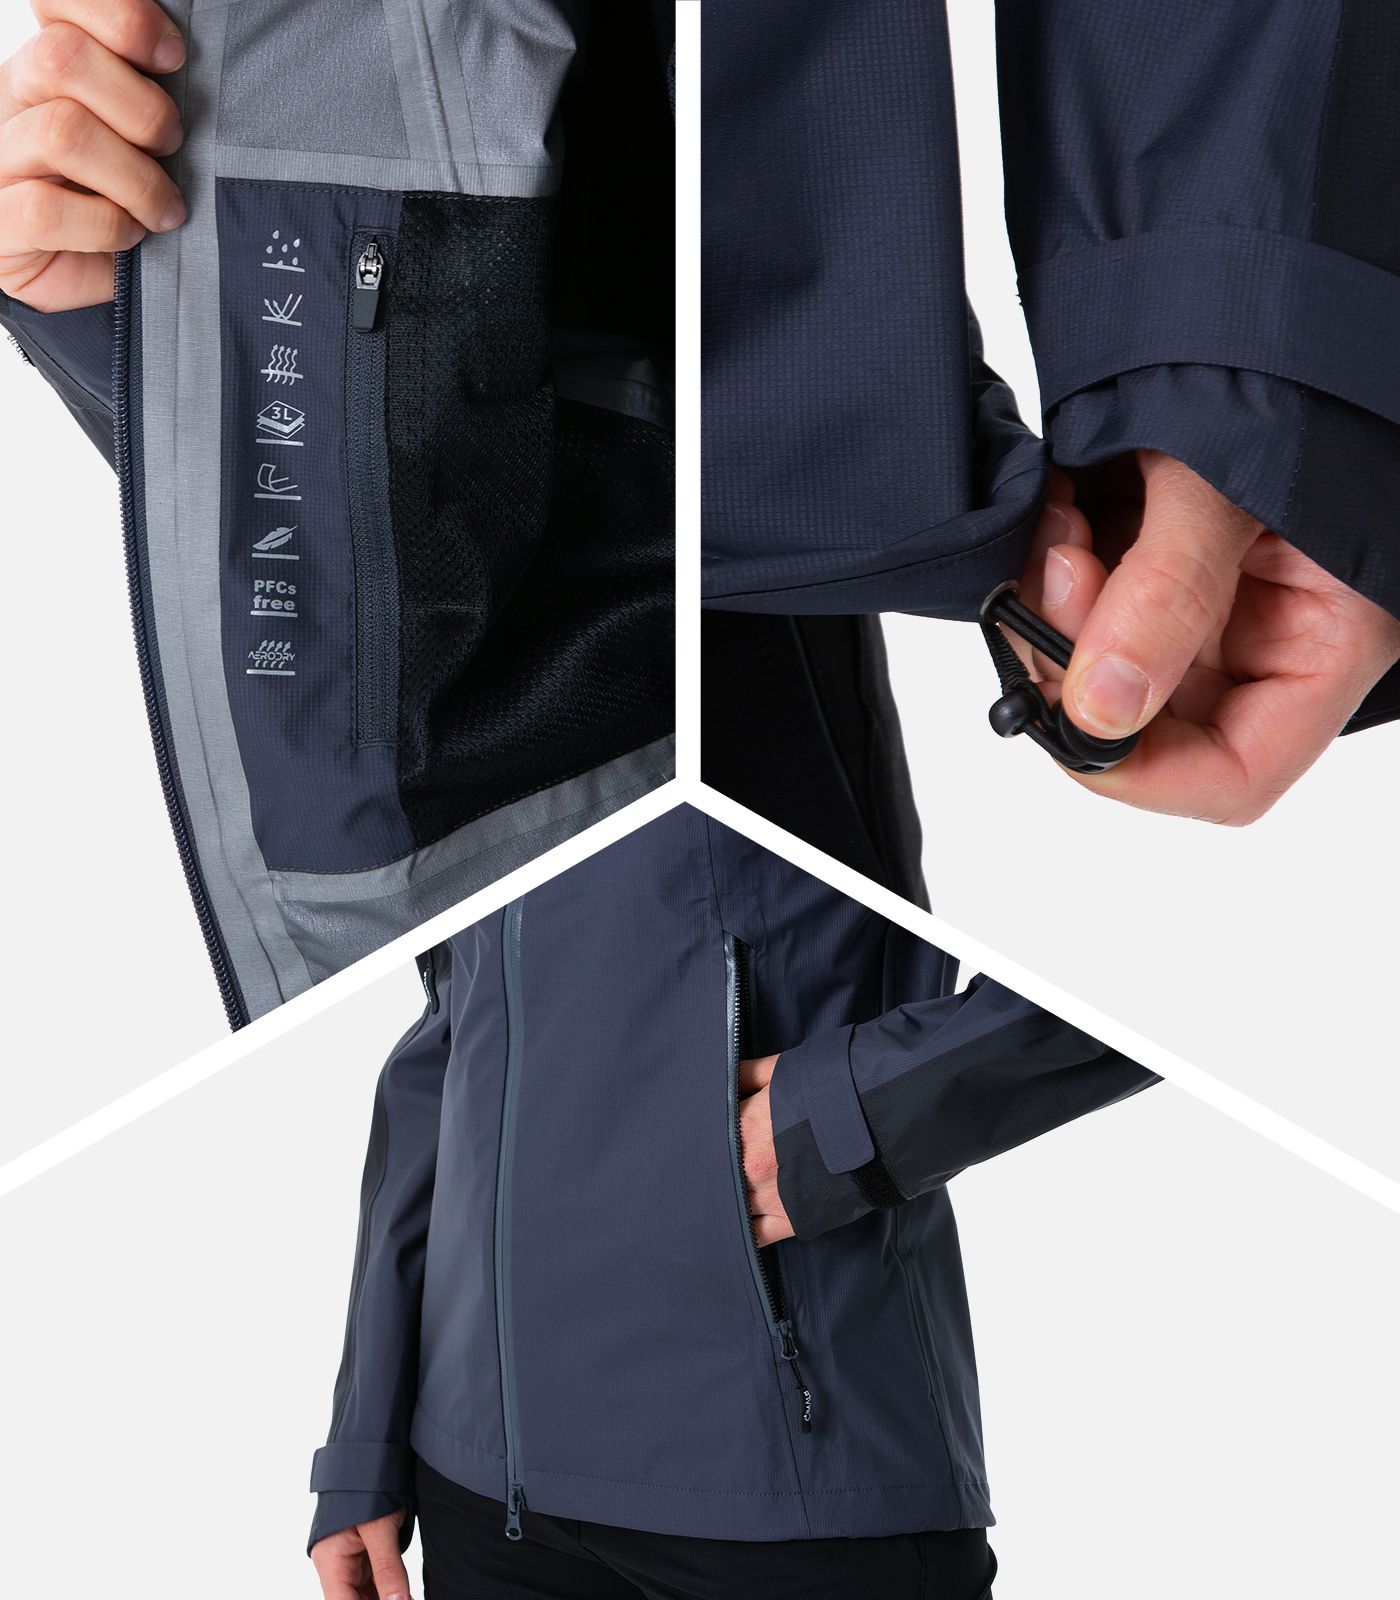 Breathable Hiking Jacket with Ultrashell® membrane